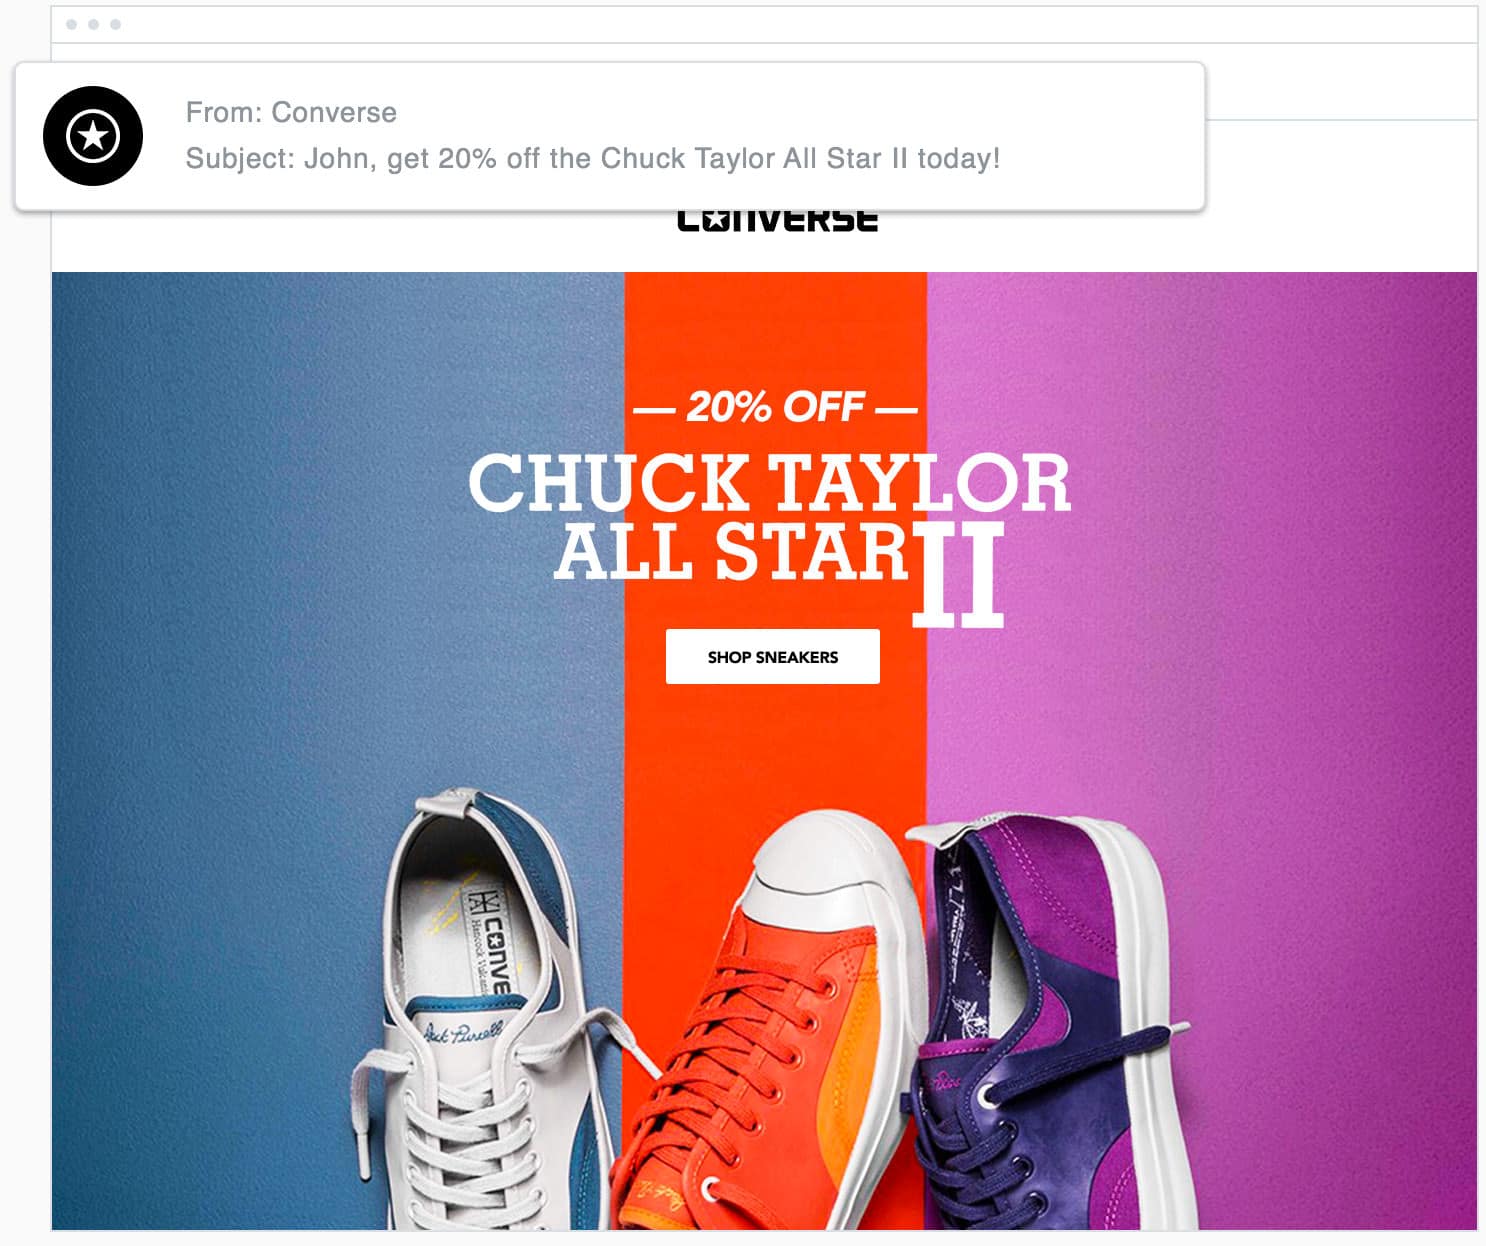 Email List Building - Converse - Email Personalization